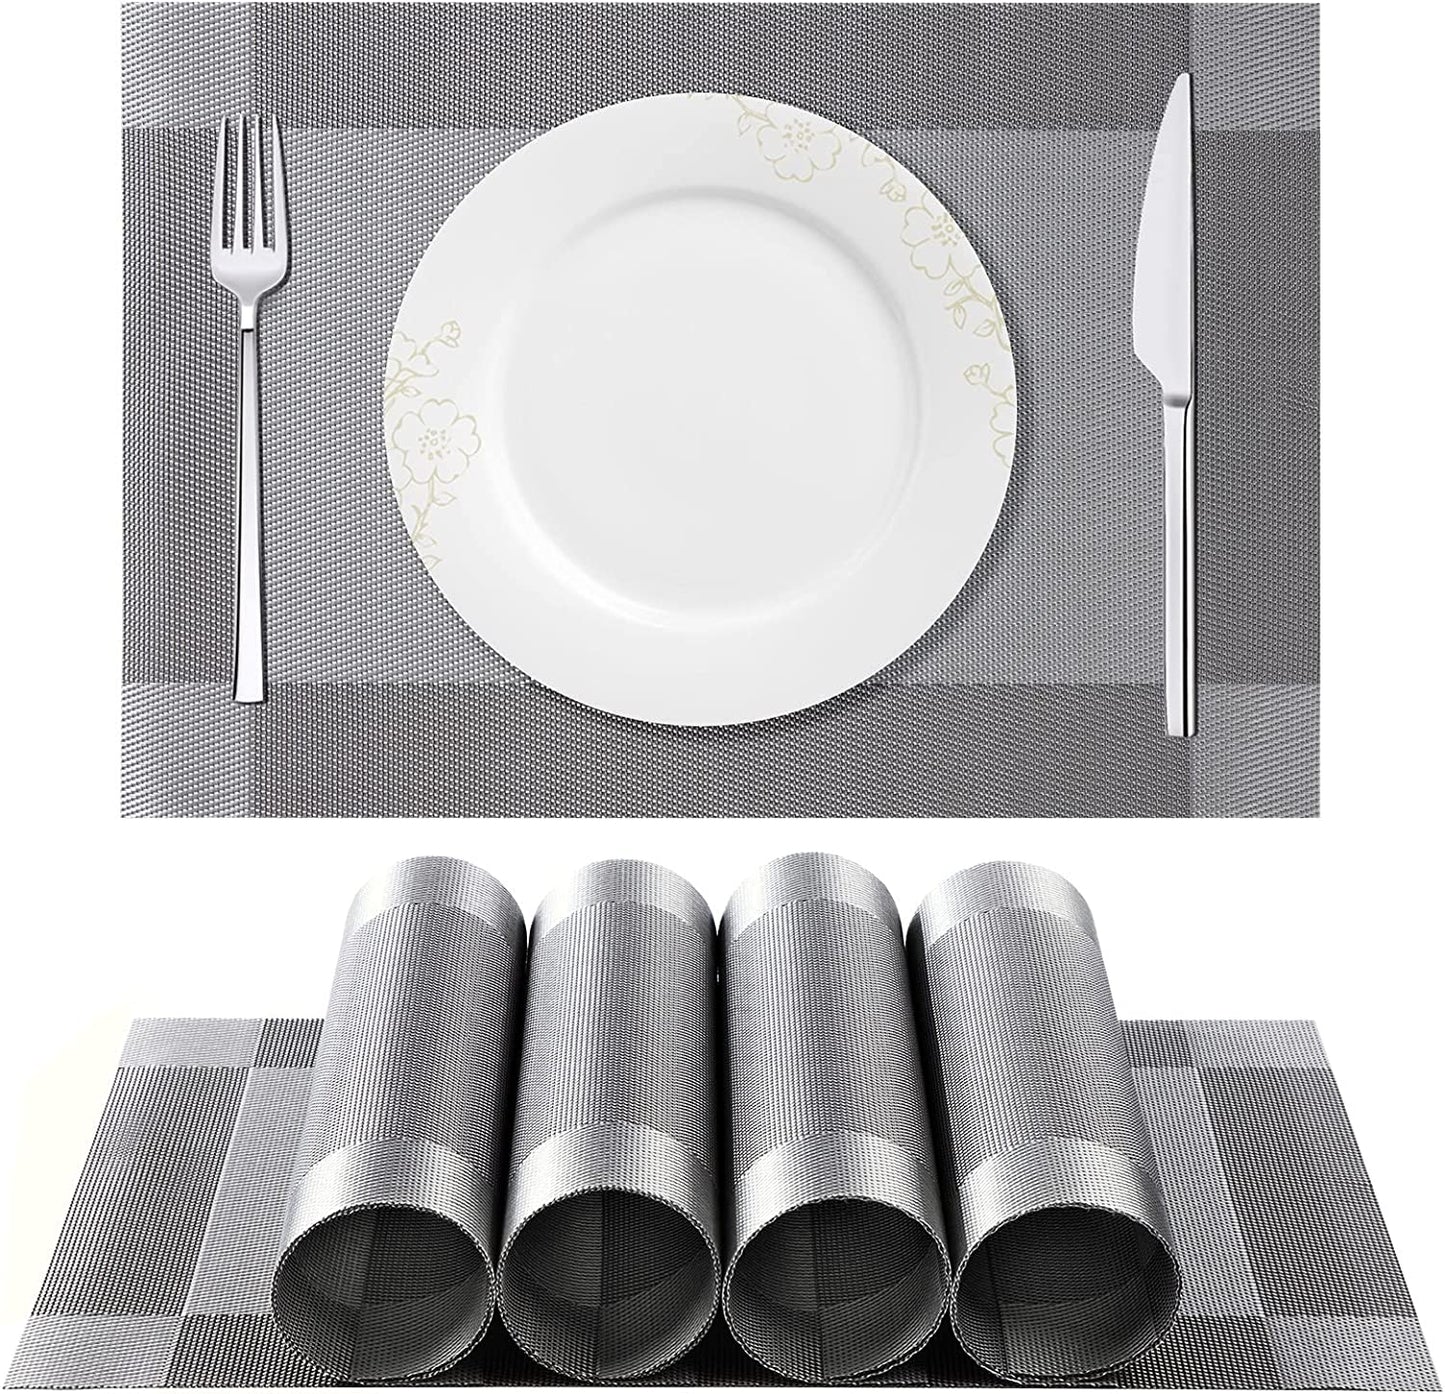 Dining Tablemats Satin Colorful Place Mats Washable Heat Resistant(45*30cm) Dining Table Placemats- #Royalkart#best dining table placemats